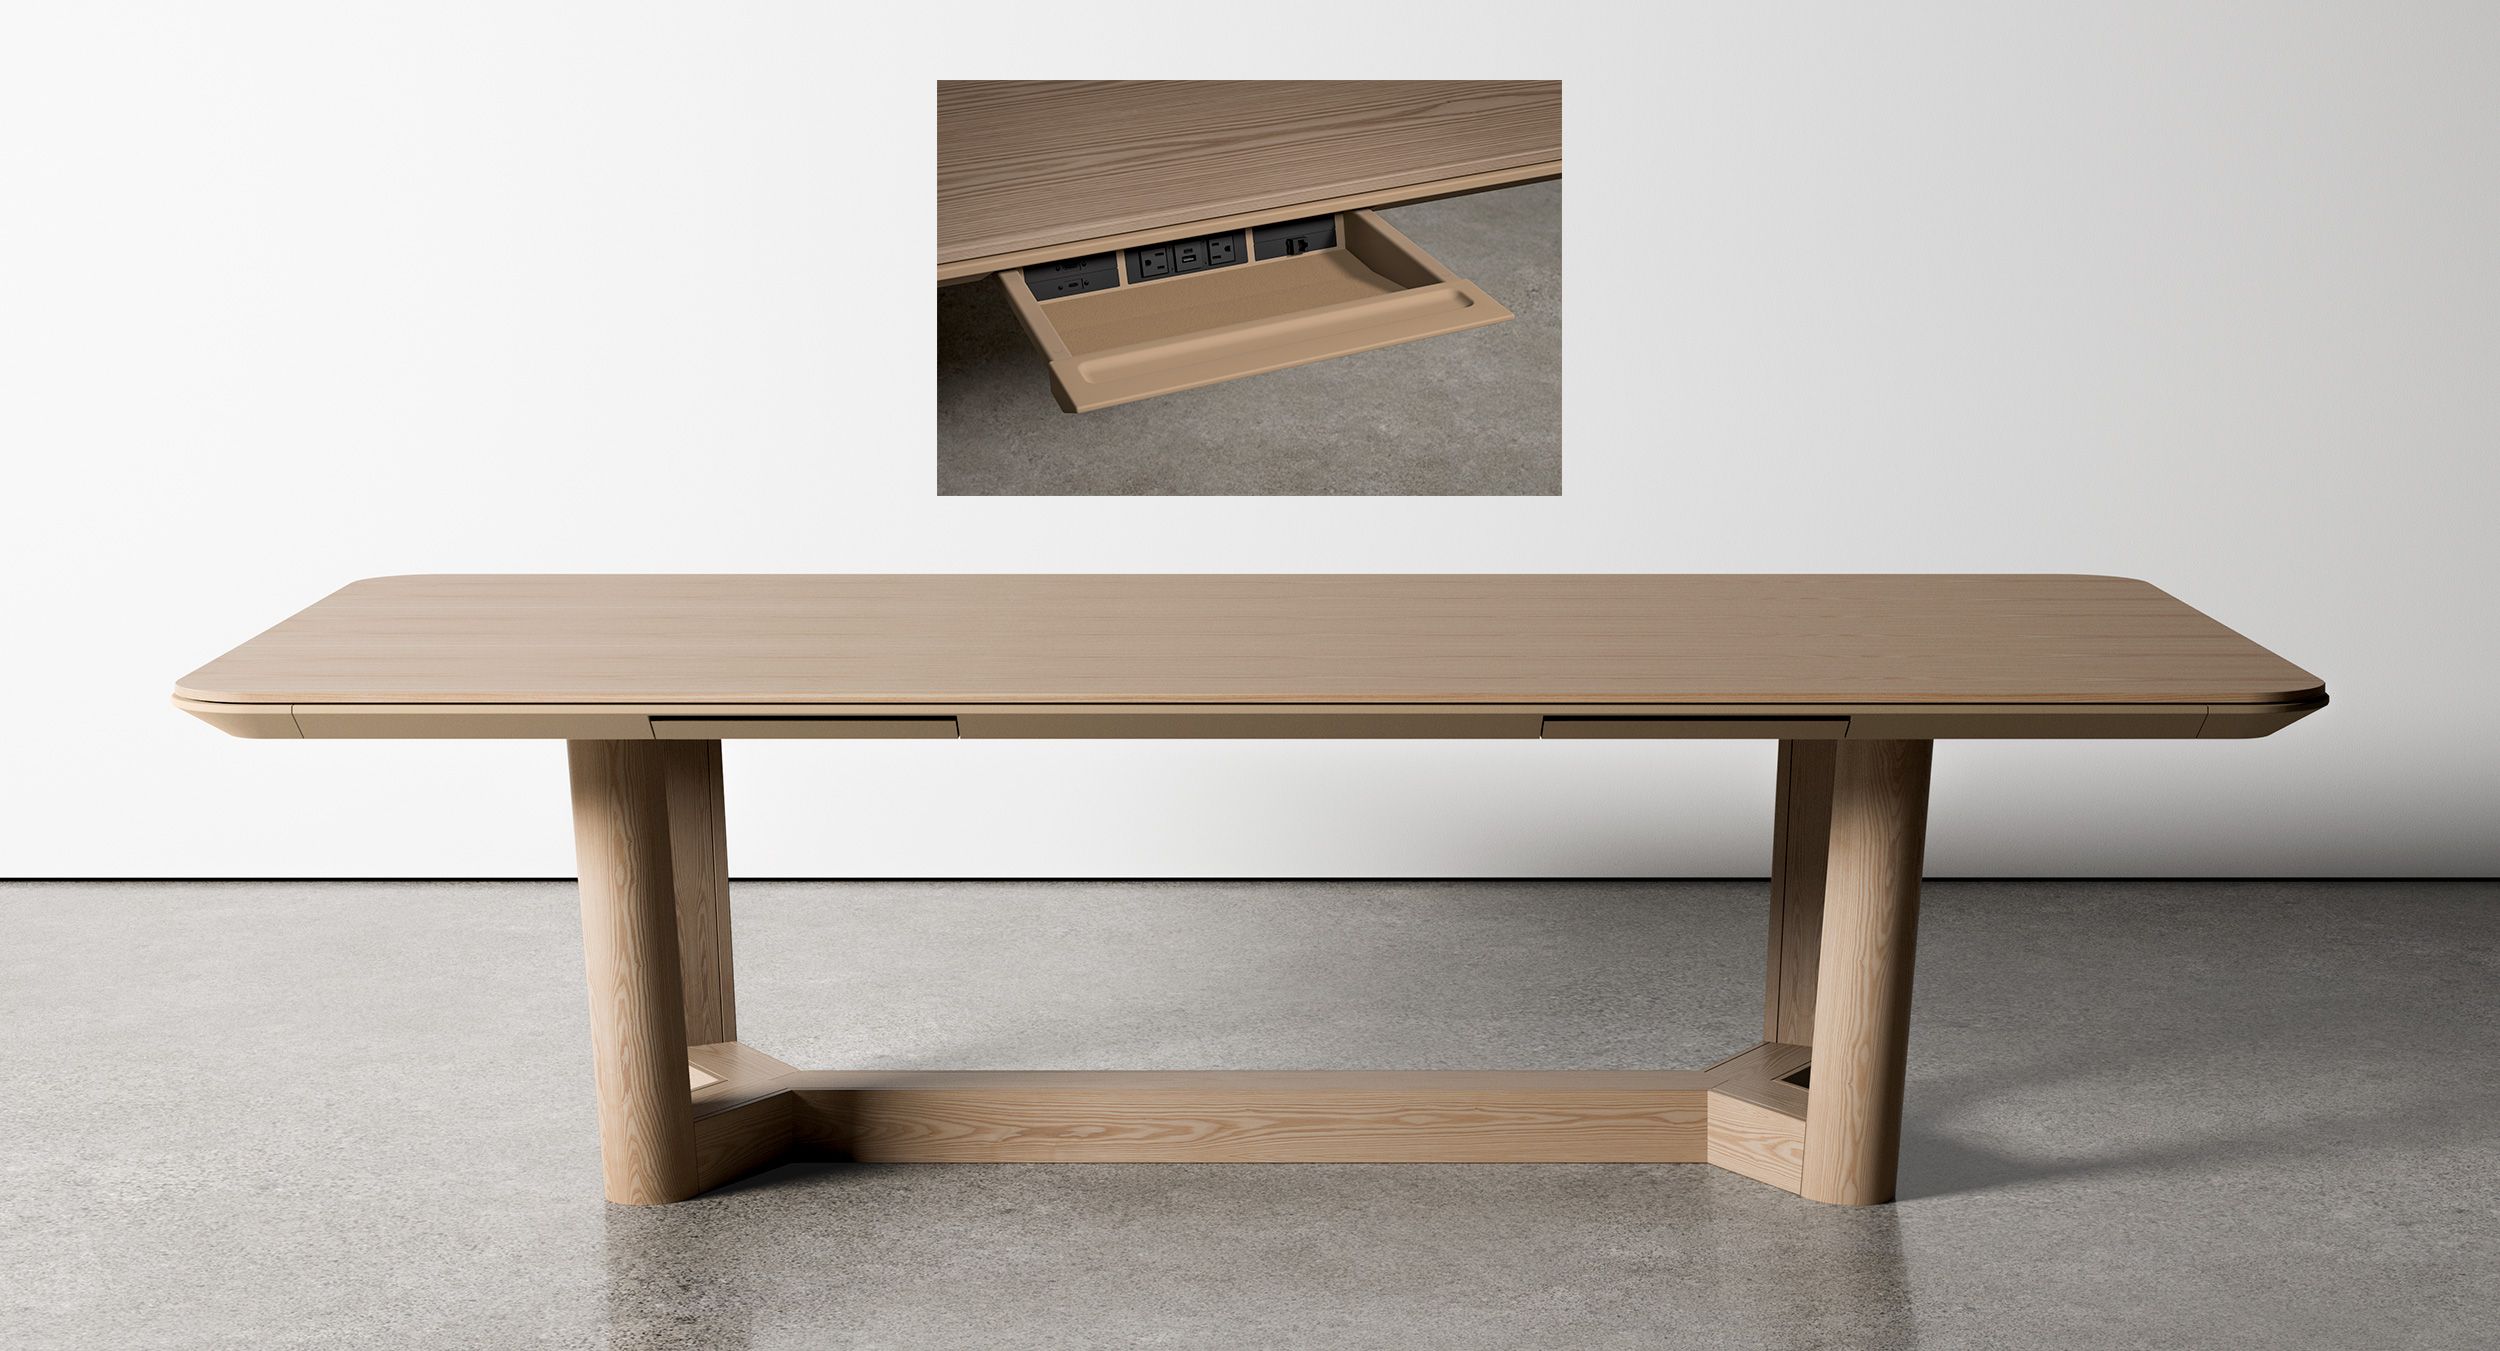 Halo also features gorgeous wood table bases in any veneer species and finish with concealed wire pathways to invisibly integrate technology needs.